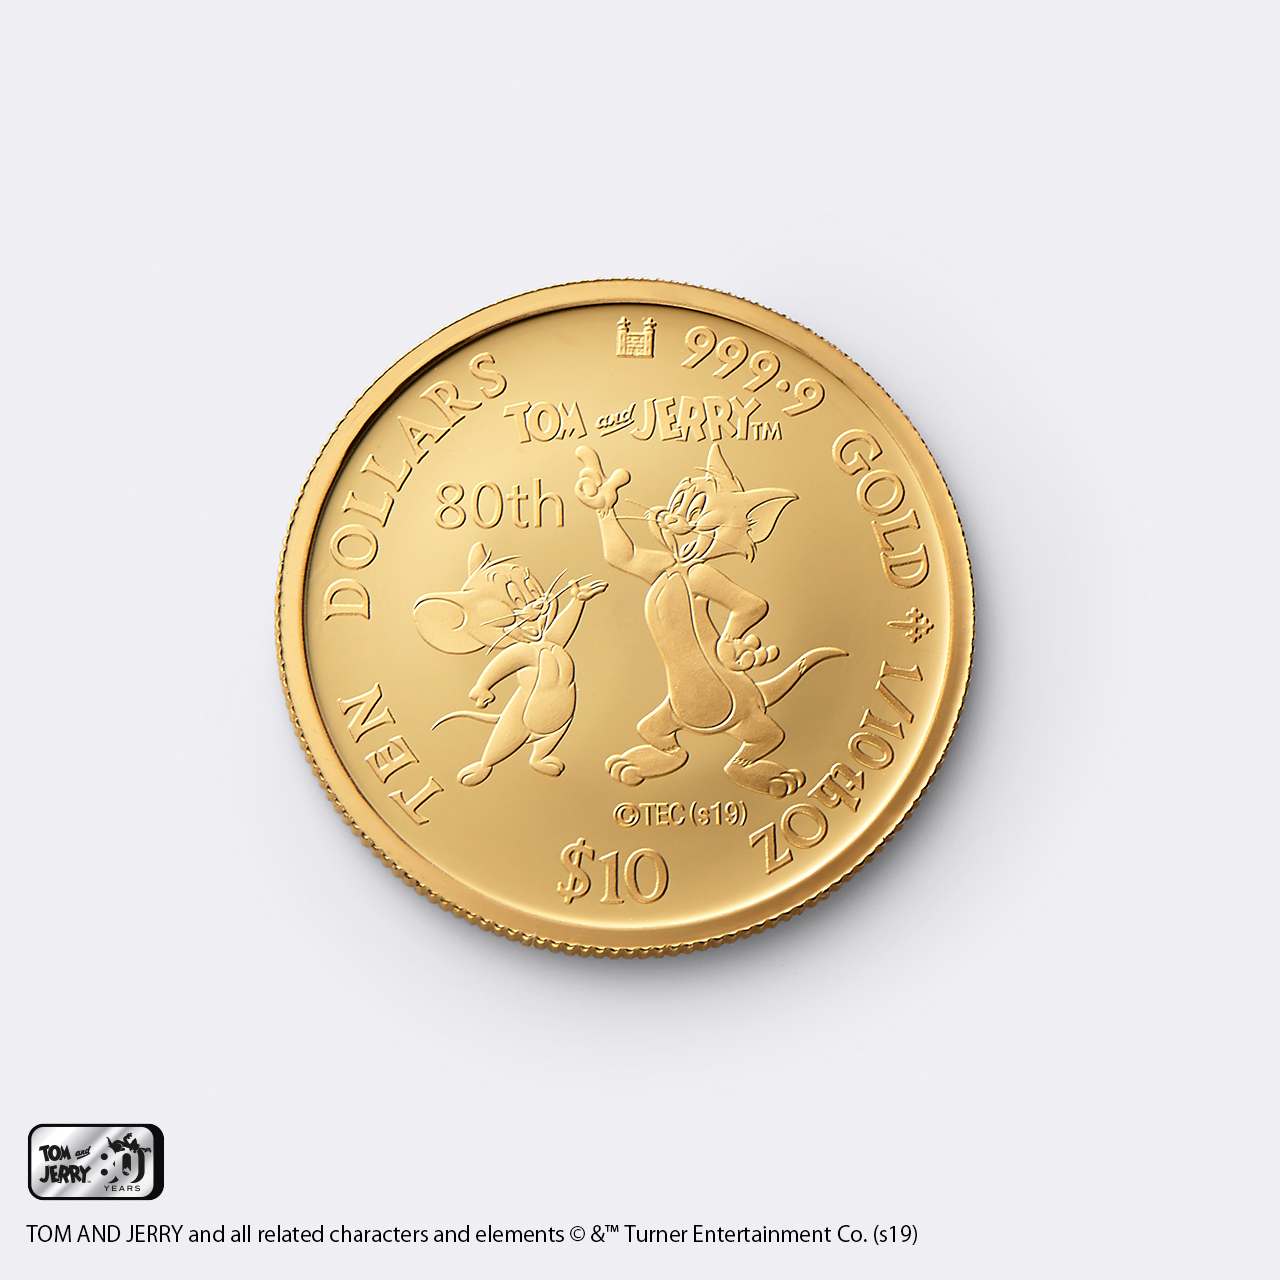 1/10 GOLD PROOF COIN